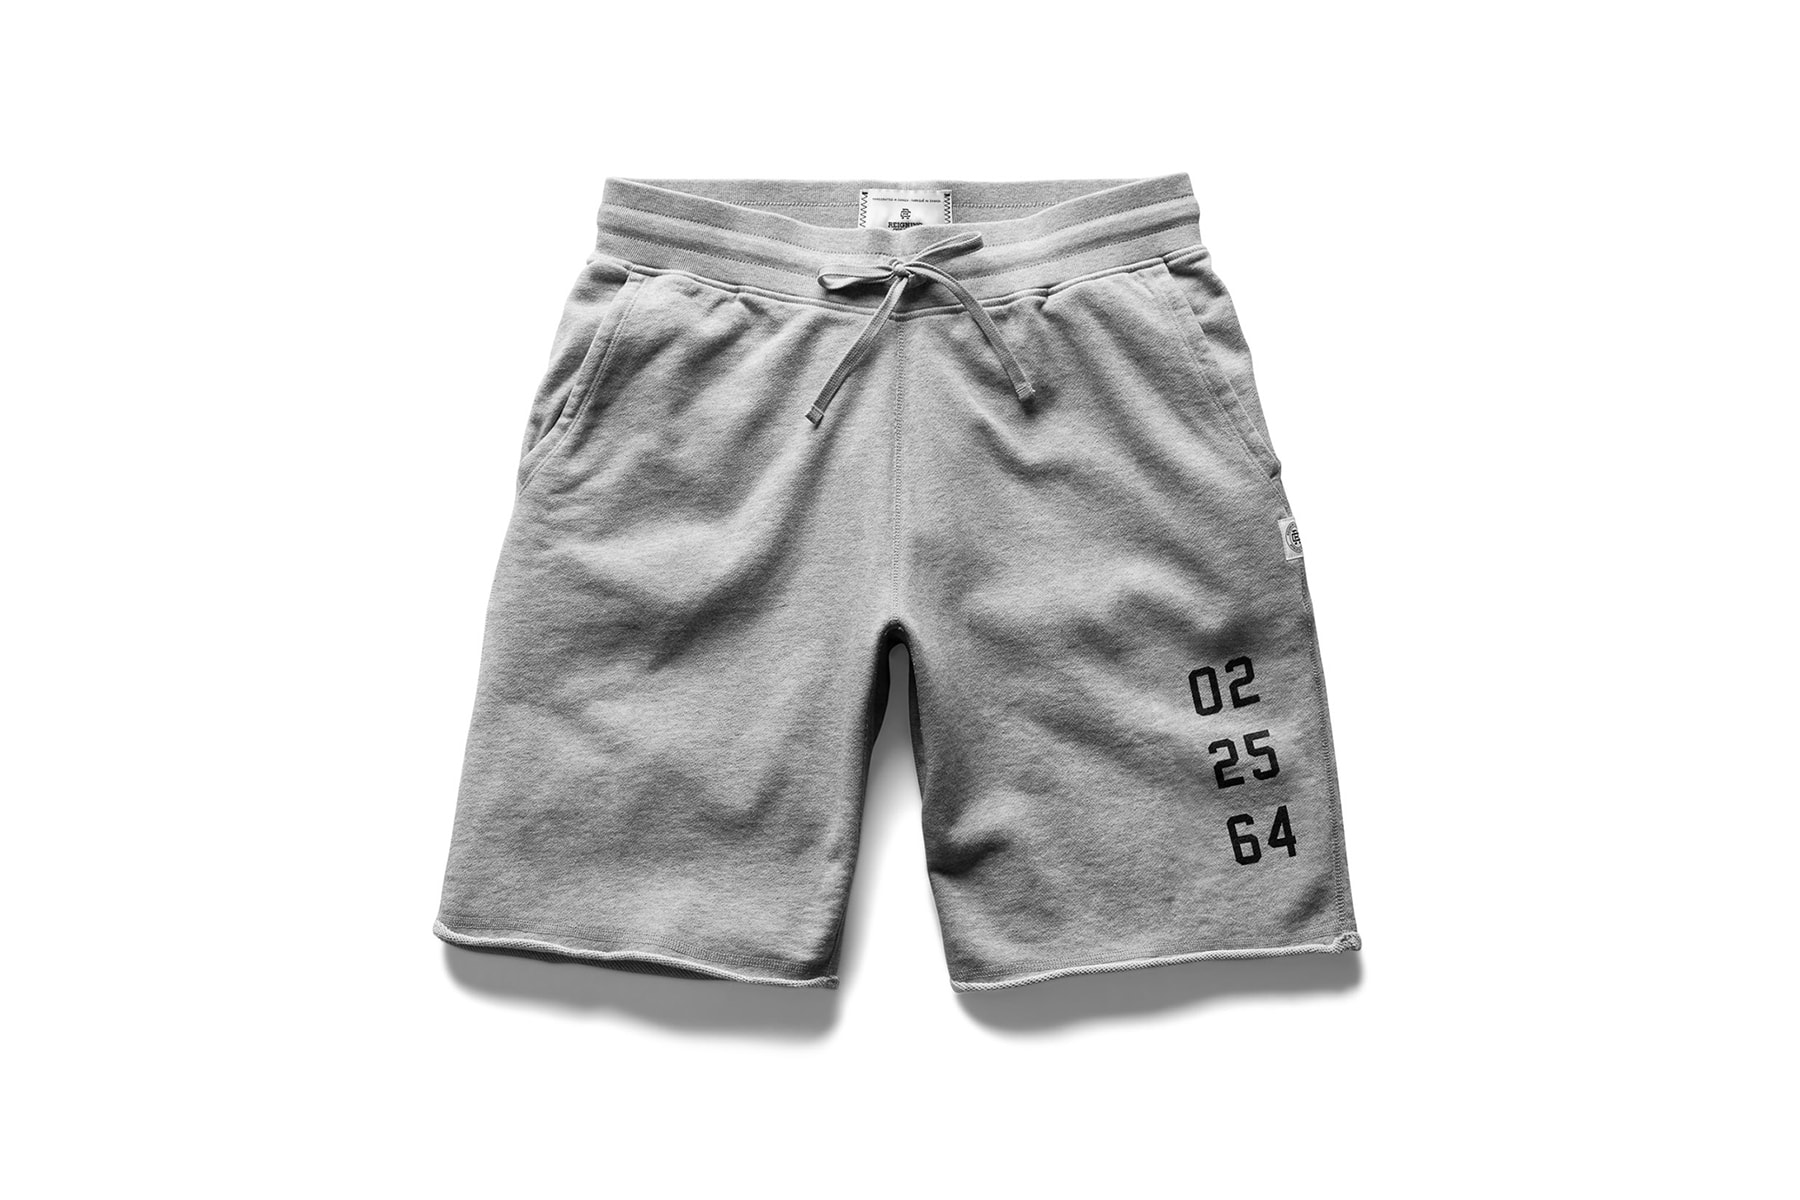 muhammad ali cassius clay reigning champ collaboration august 2 2018 grey sweat shorts